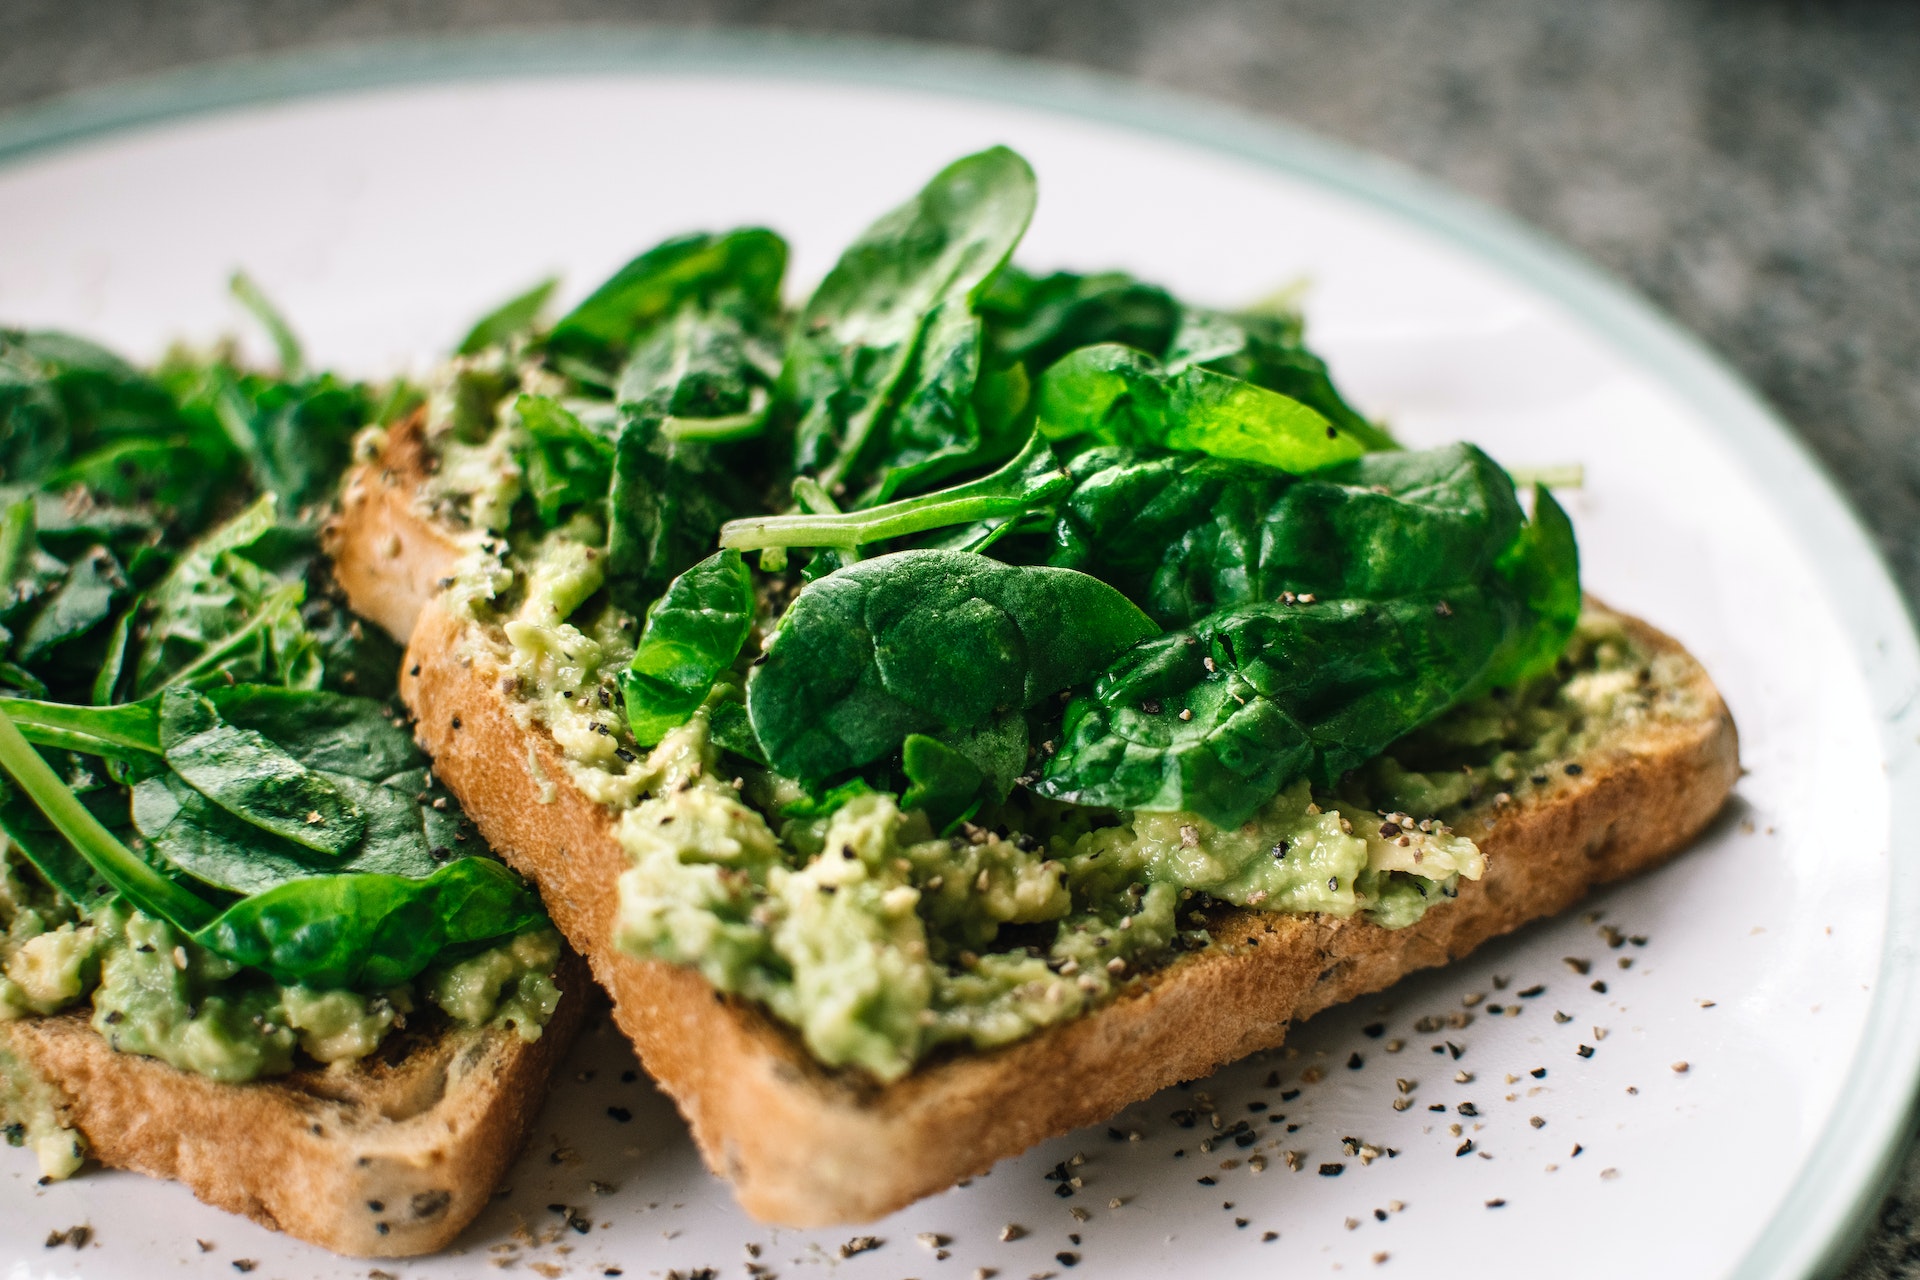 Top 10 Surprising Spinach Facts You Didn’t Know